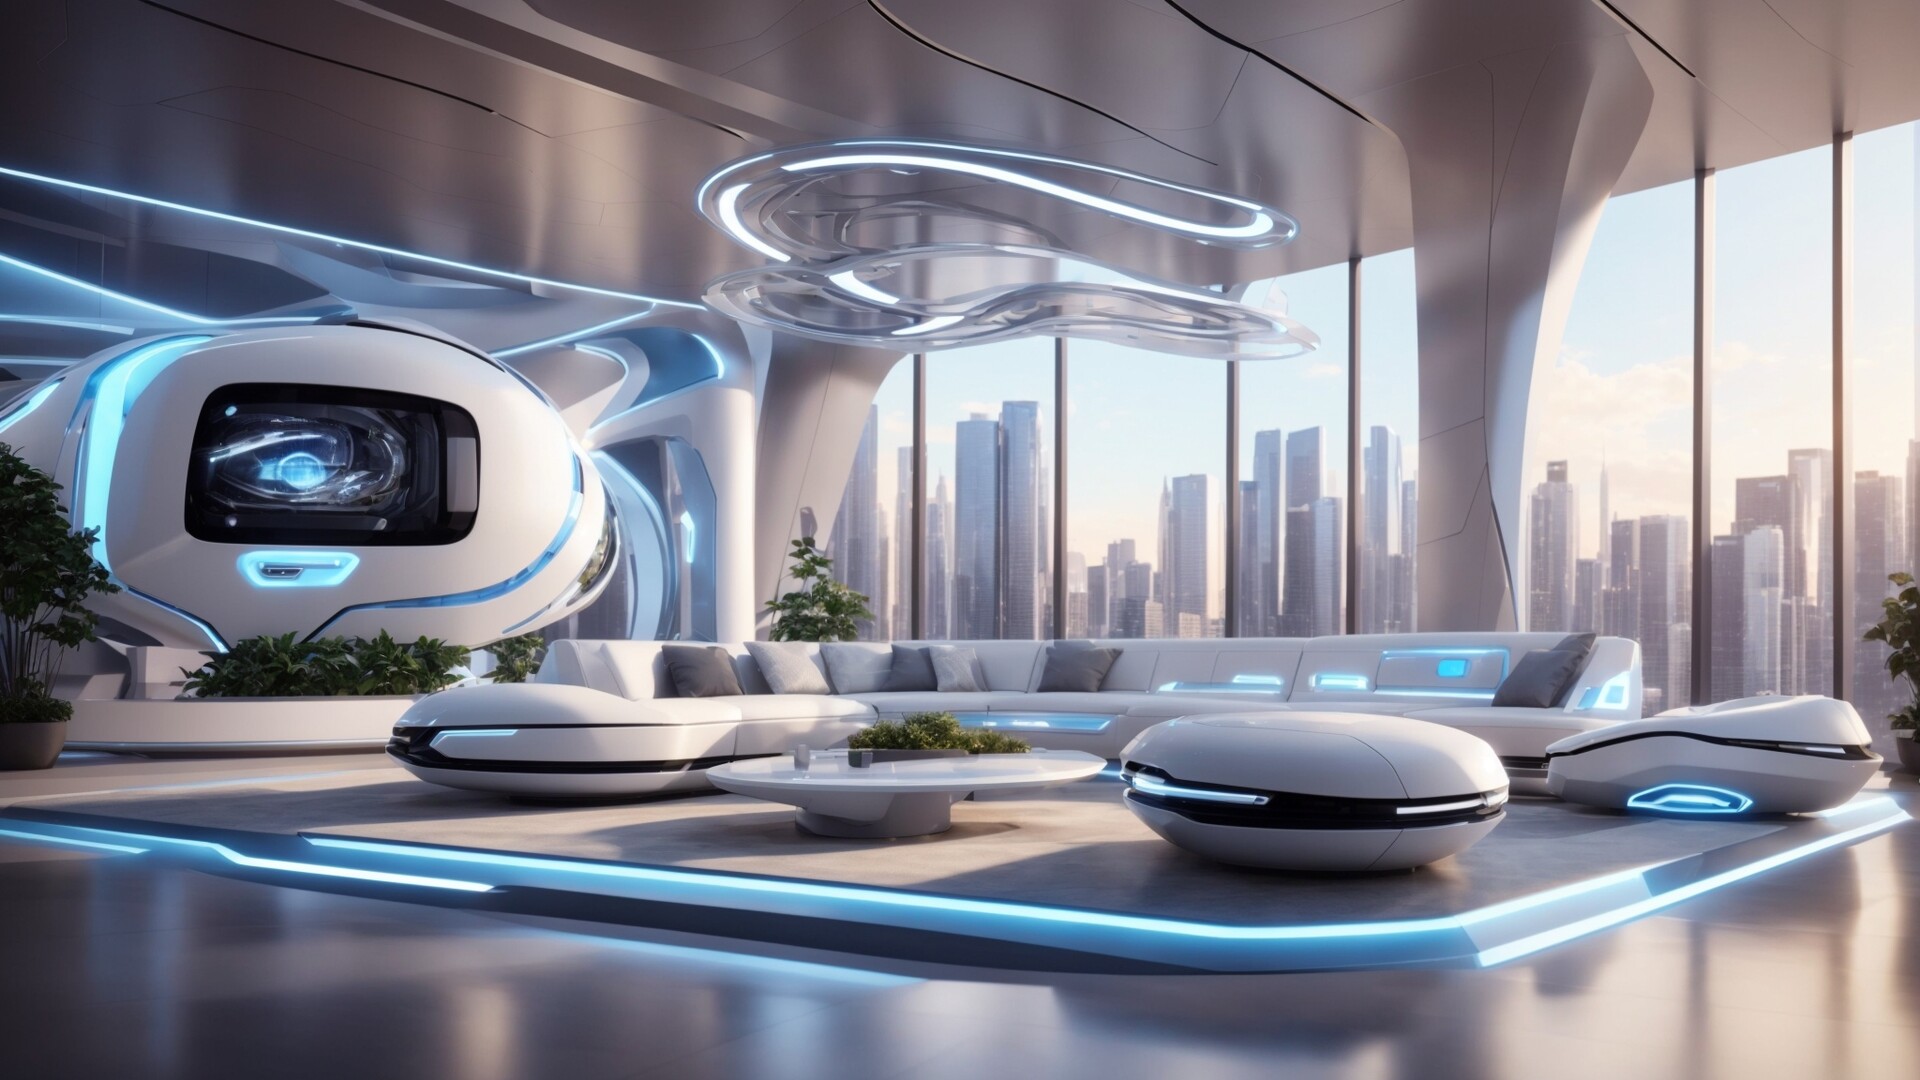 Room by Room, Automation is Changing Interior Architecture | ArchDaily